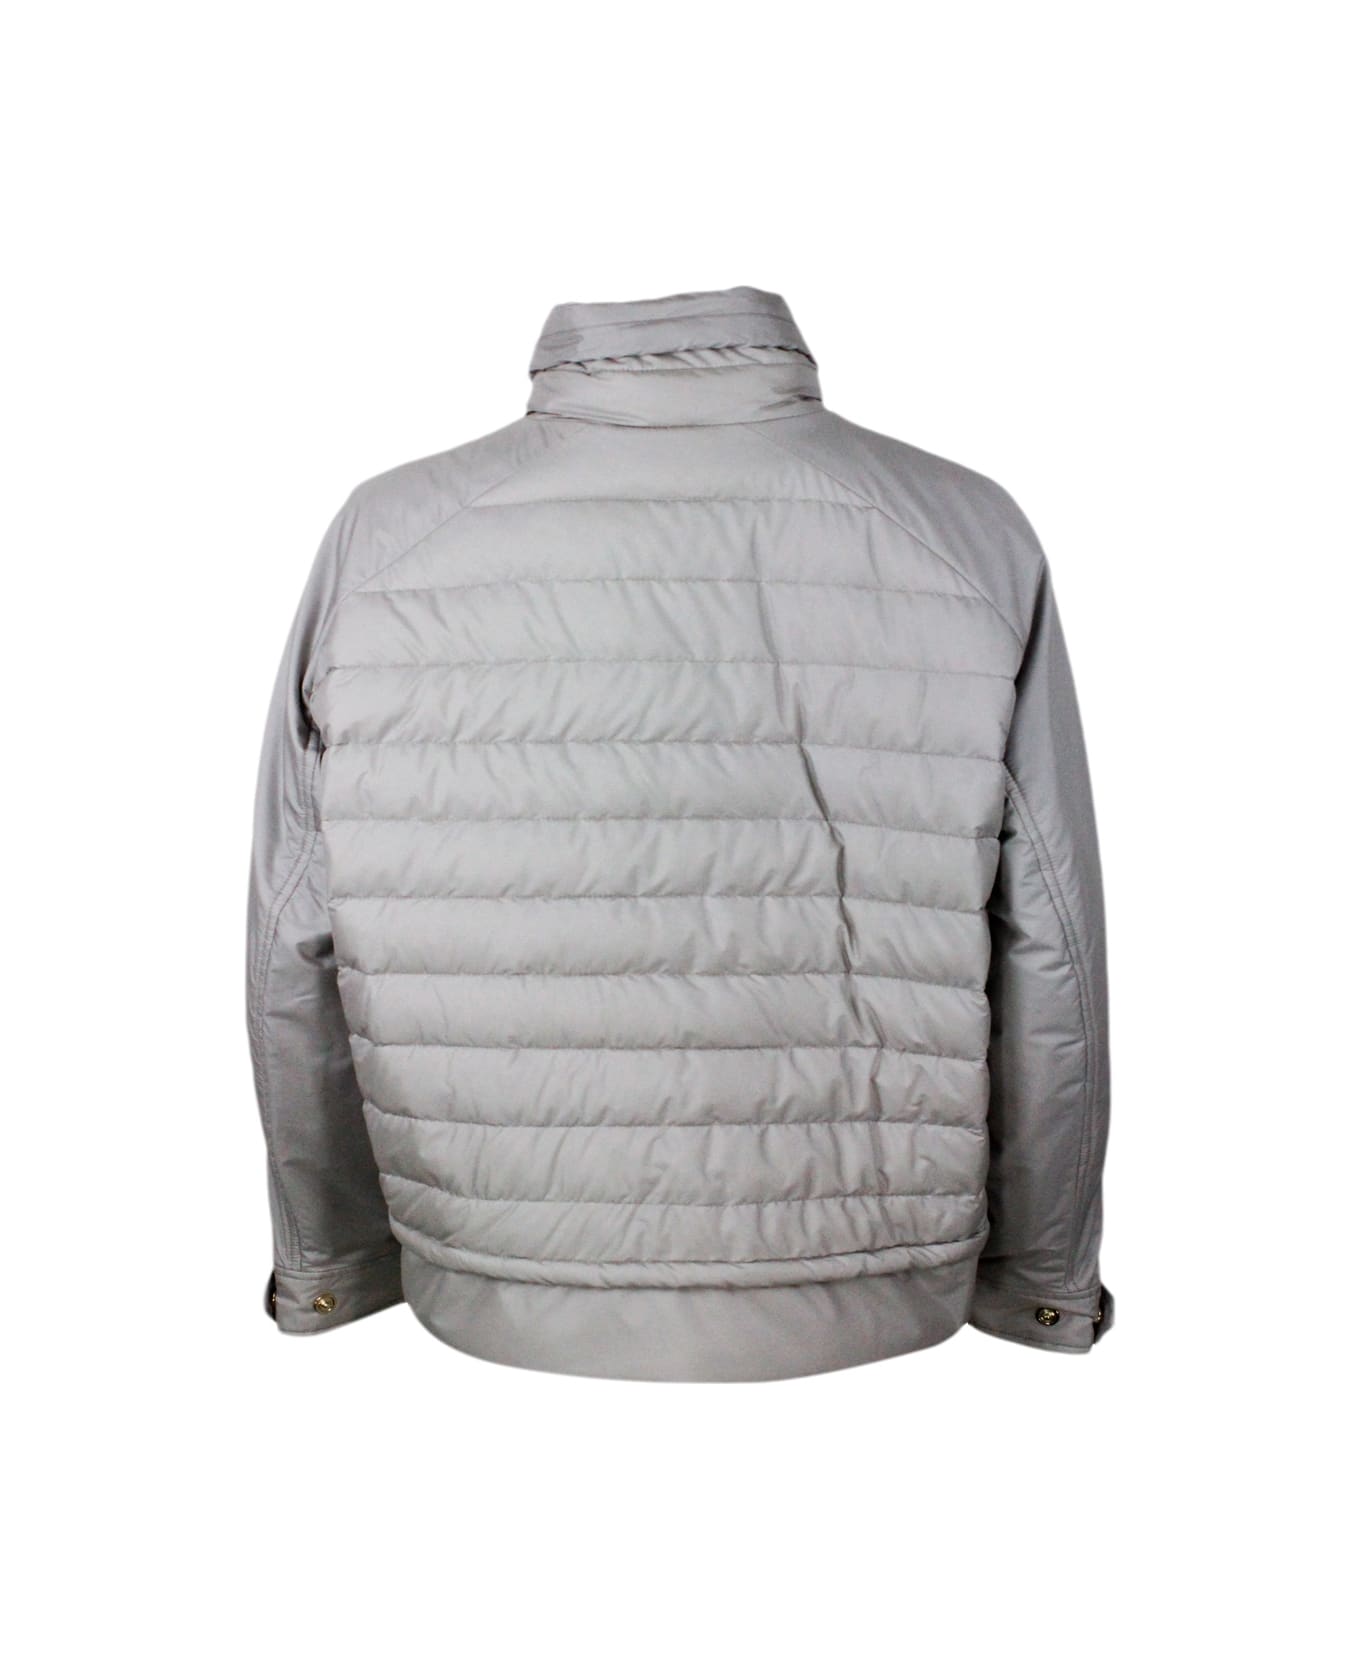 Moorer Lightweight 100 Gram Fine Down Jacket With An A-line Shape And Adjustable Drawstring At The Hem And Neck. Zip Closure - Ice ダウンジャケット